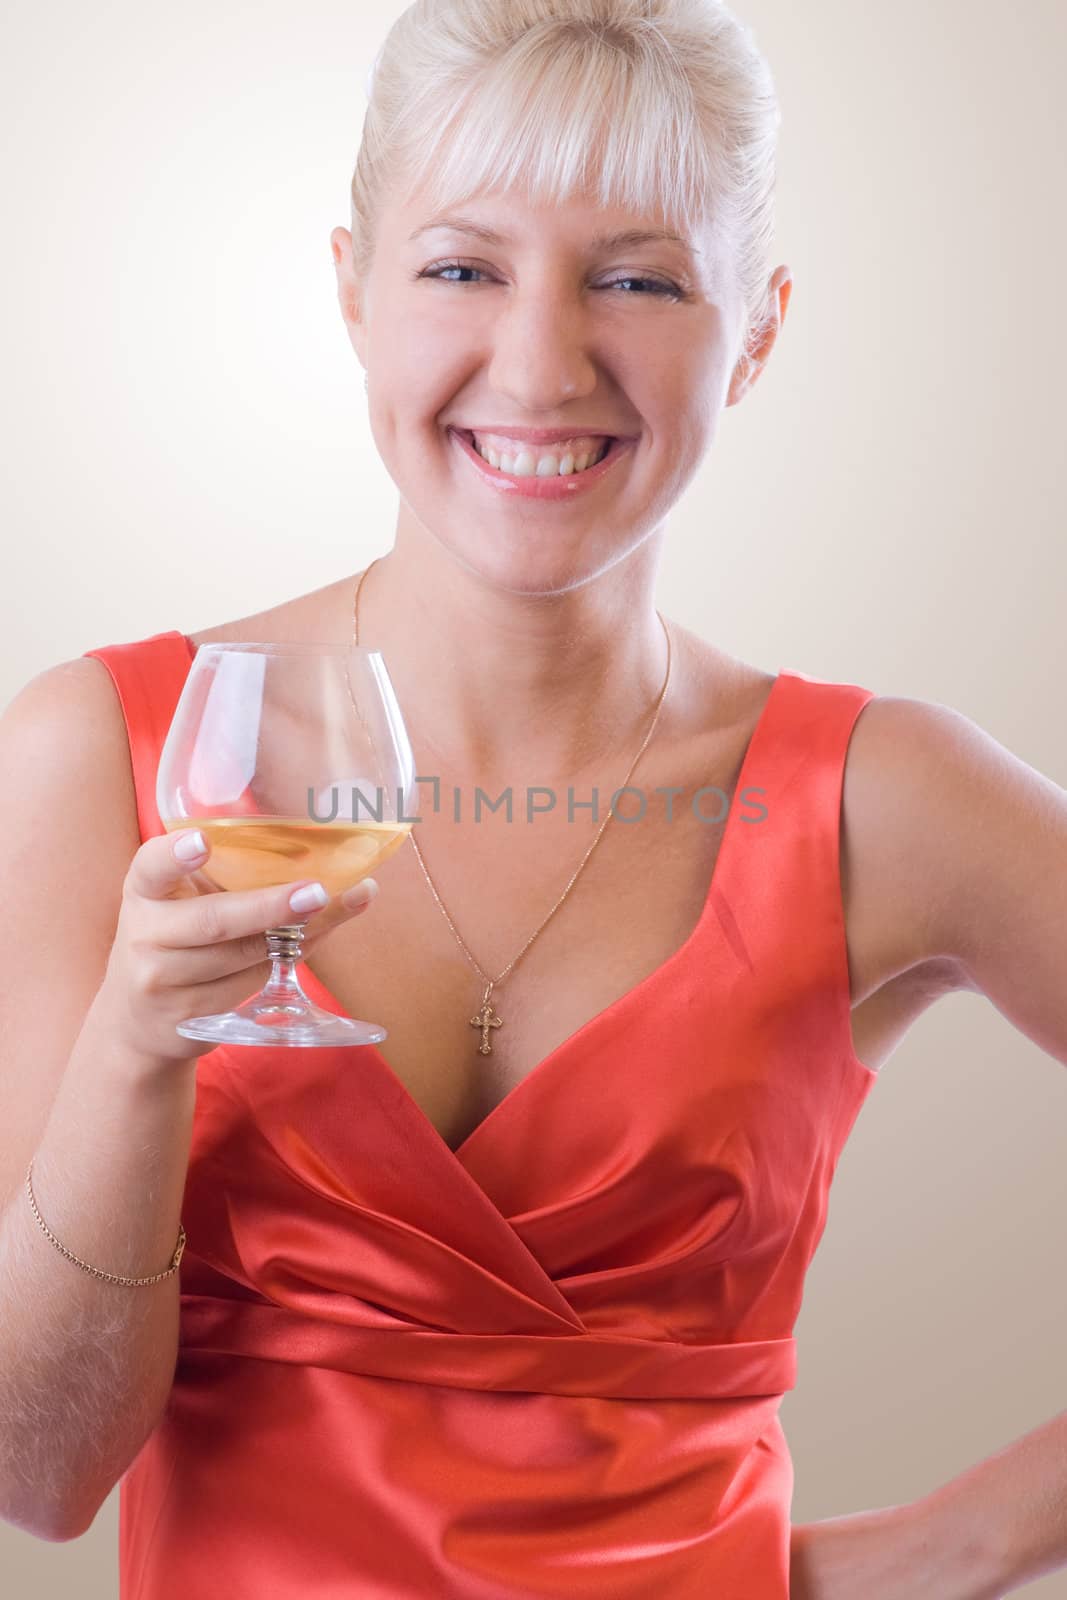 Blond woman with a glass of wine. #1 by Amidos